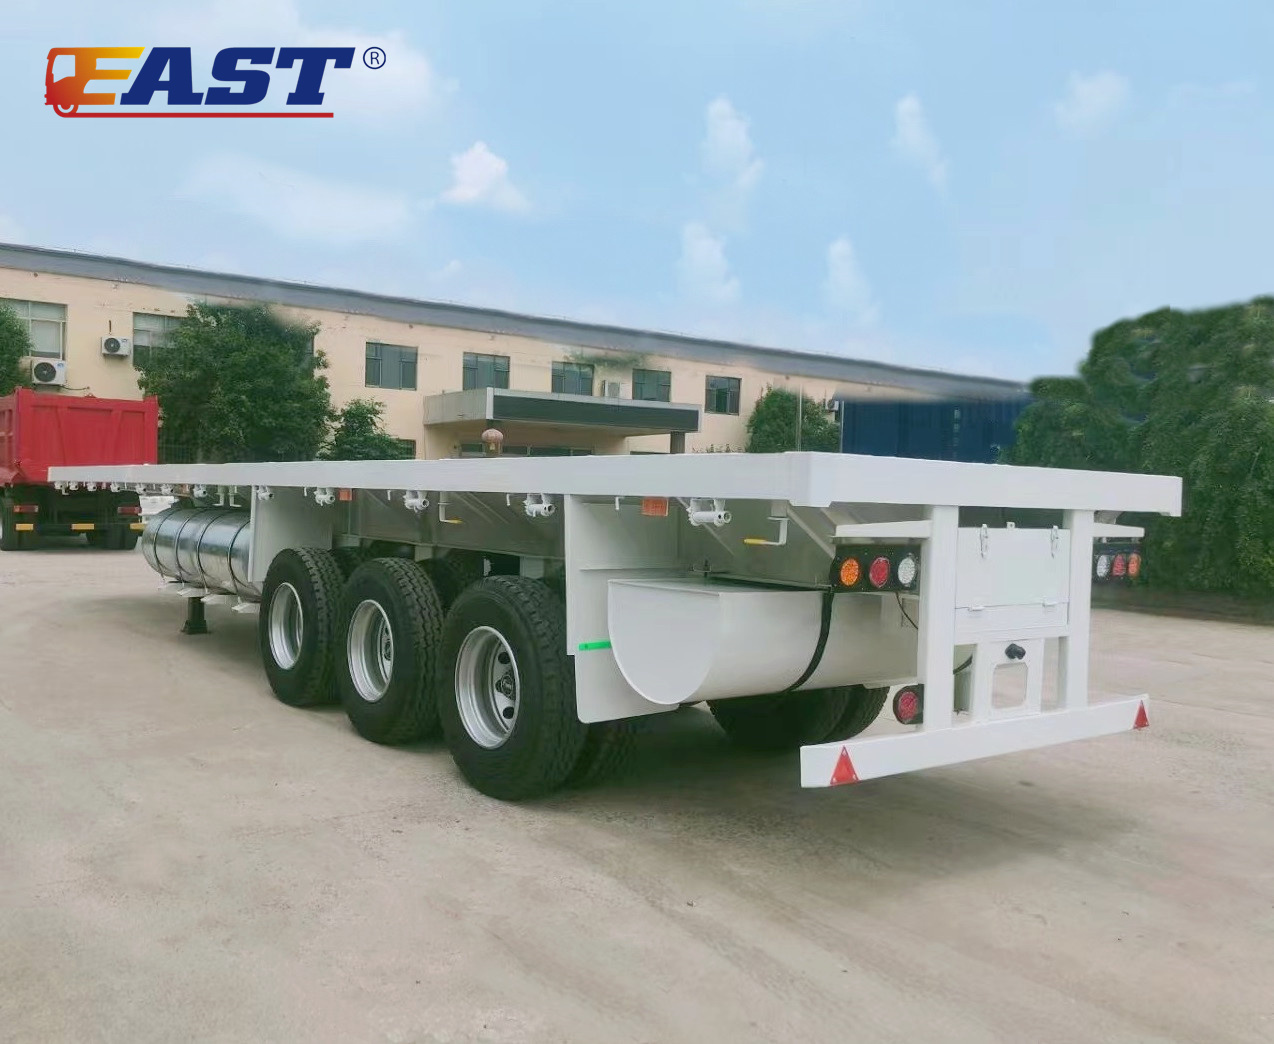 Flatbed trailer with custom oversized fuel tank